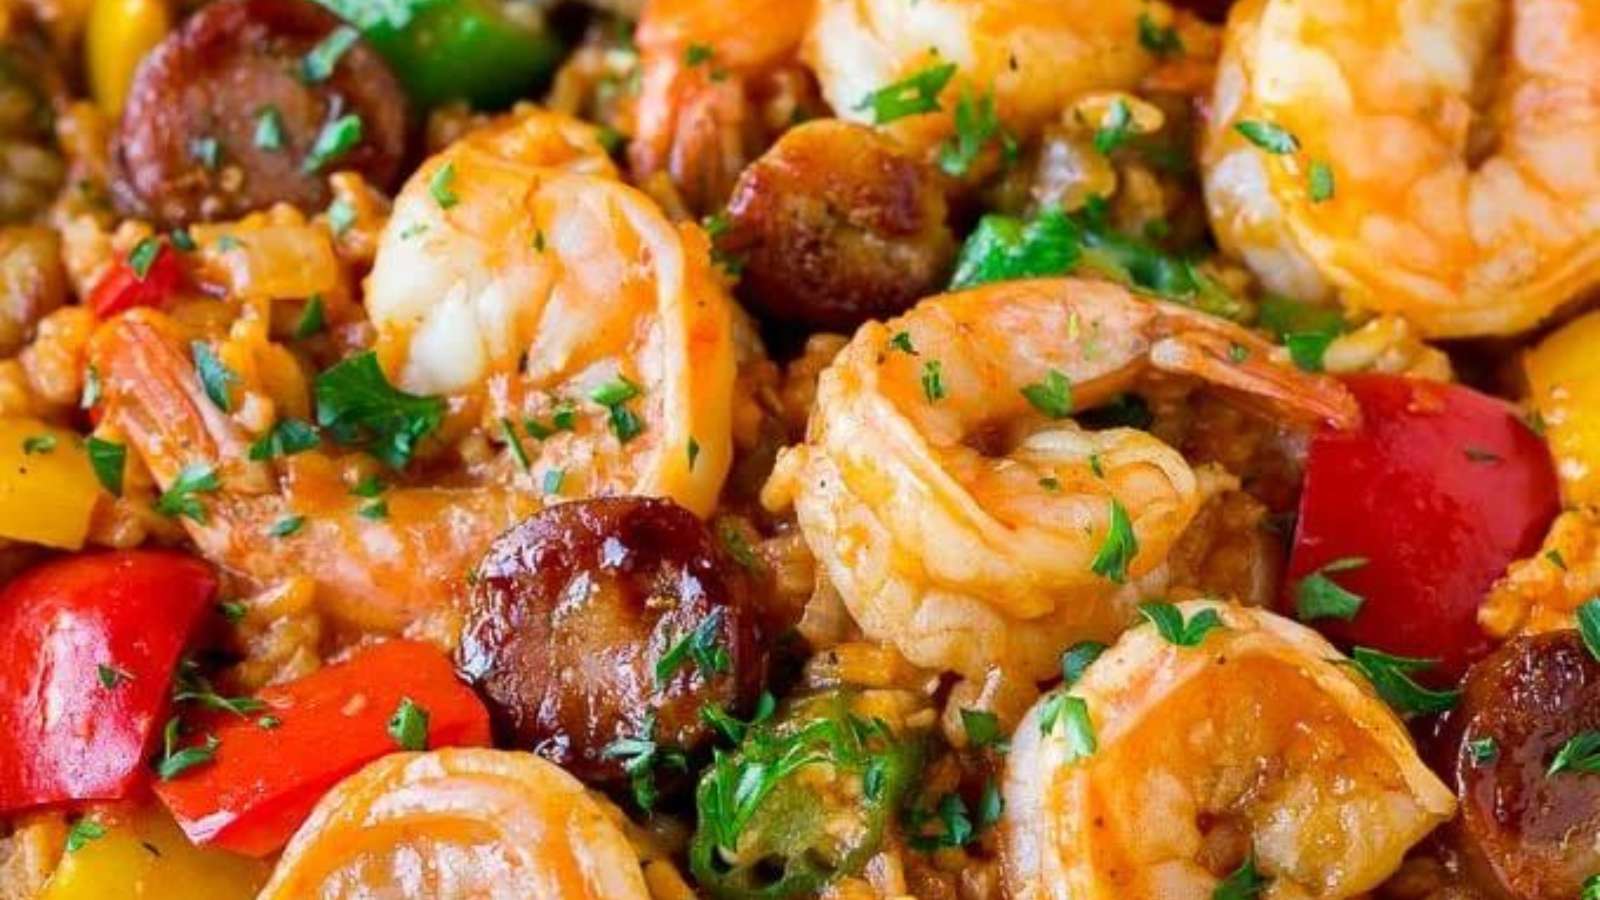 A dish with shrimp, peppers and rice.